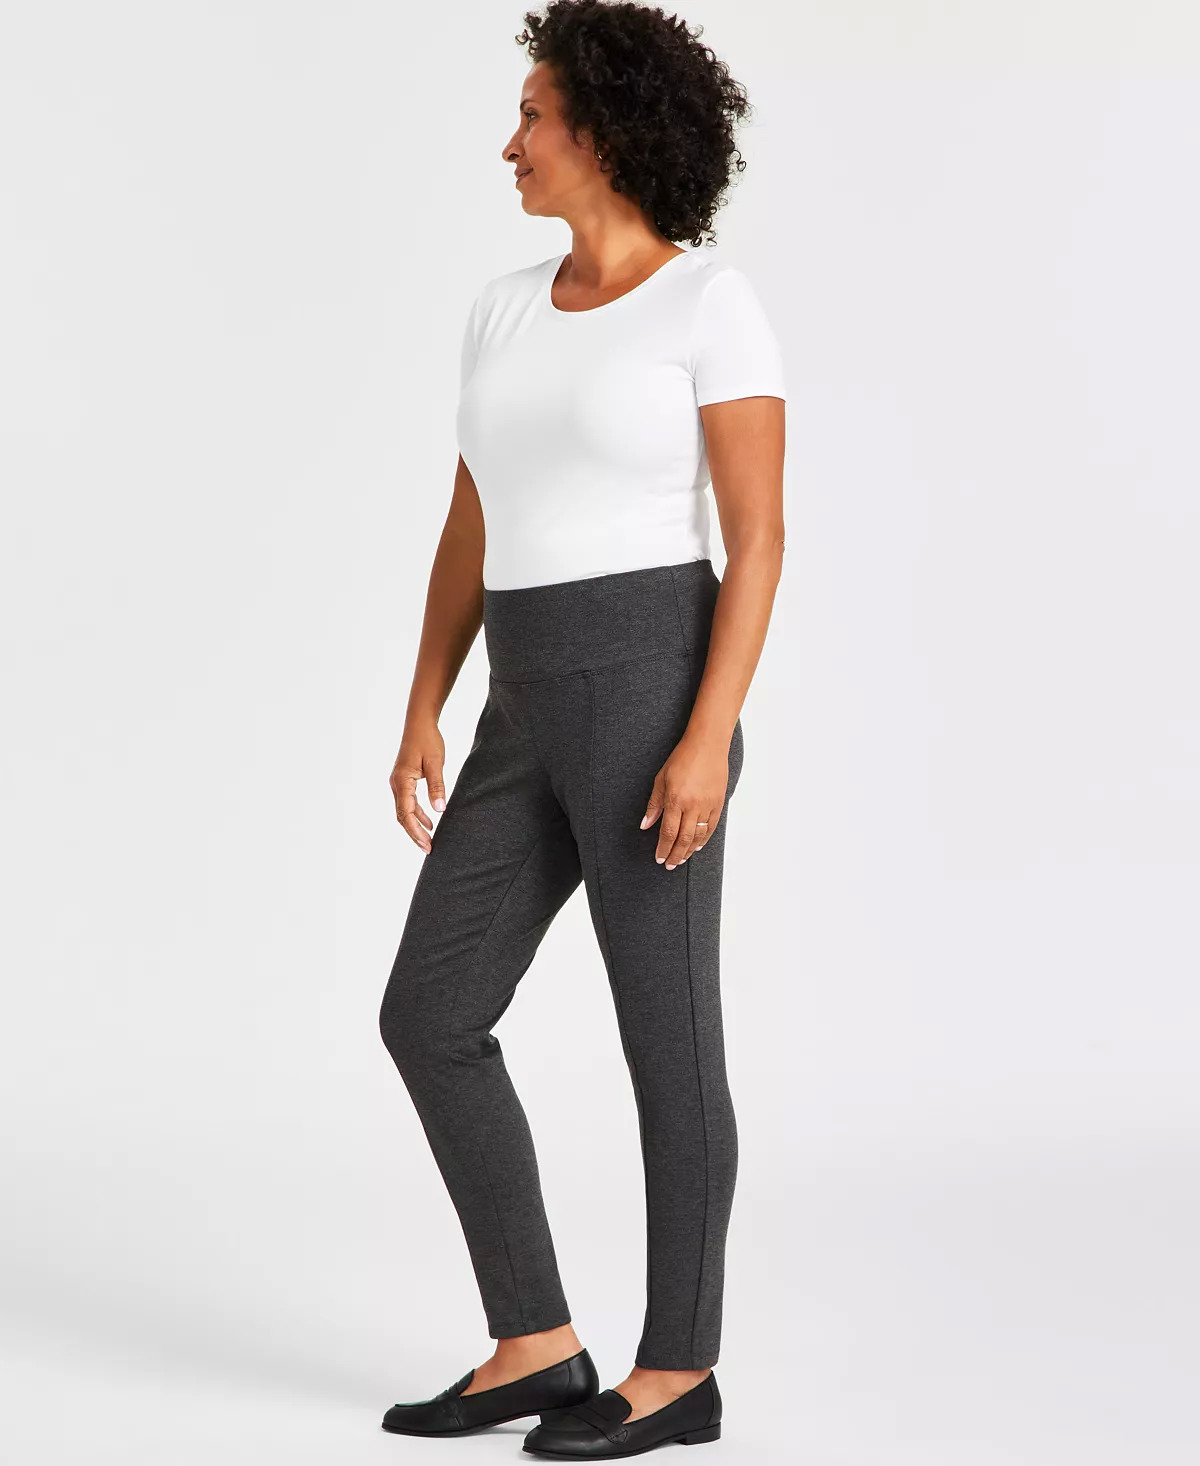 Style & Co Women's Mid-Rise Ponte-Knit Tummy Control Pants (Charcoal Grey) $13.83 + Free Store Pickup at Macy's or Free Shipping on $25+